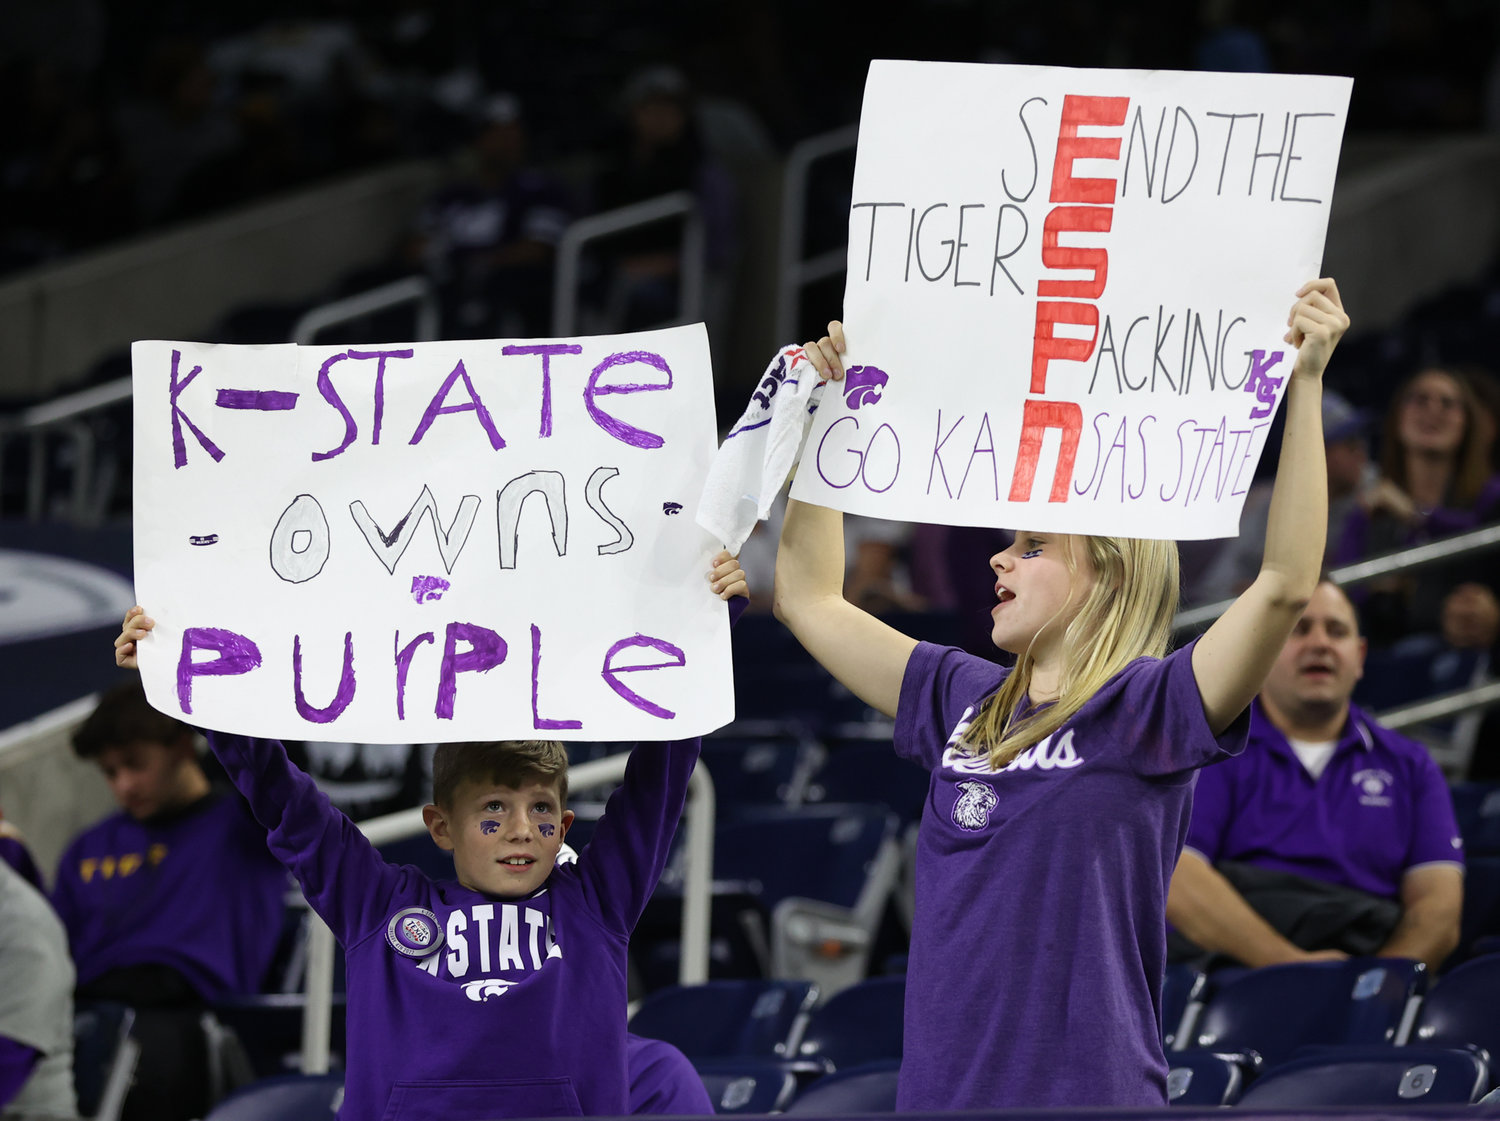 Kansas State Wildcats fans during the TaxAct Texas Bowl on Jan. 4, 2022 in Houston, Texas.